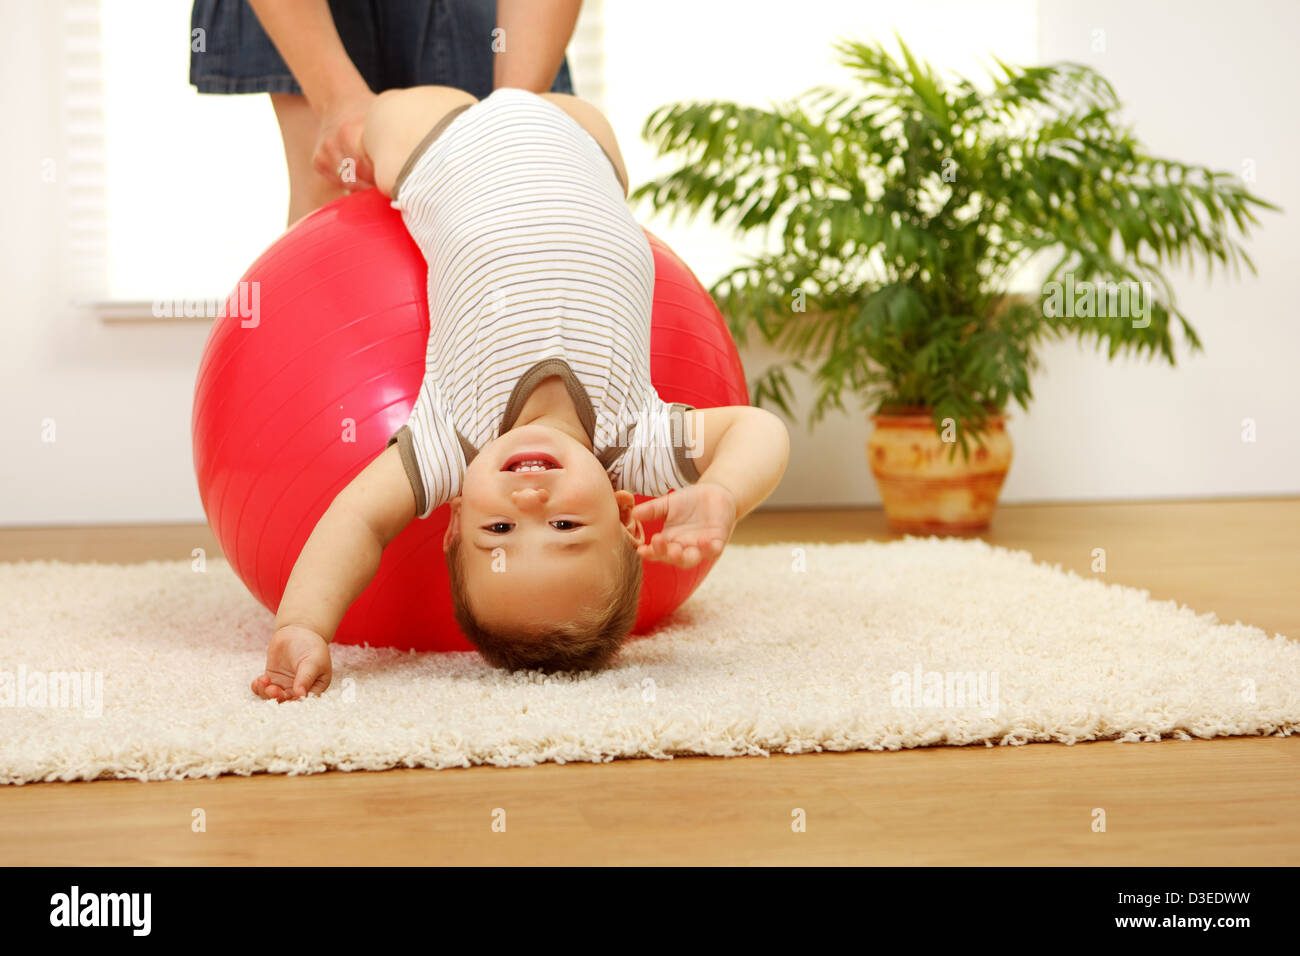 Baby boy playing on big red ball Stock Photo